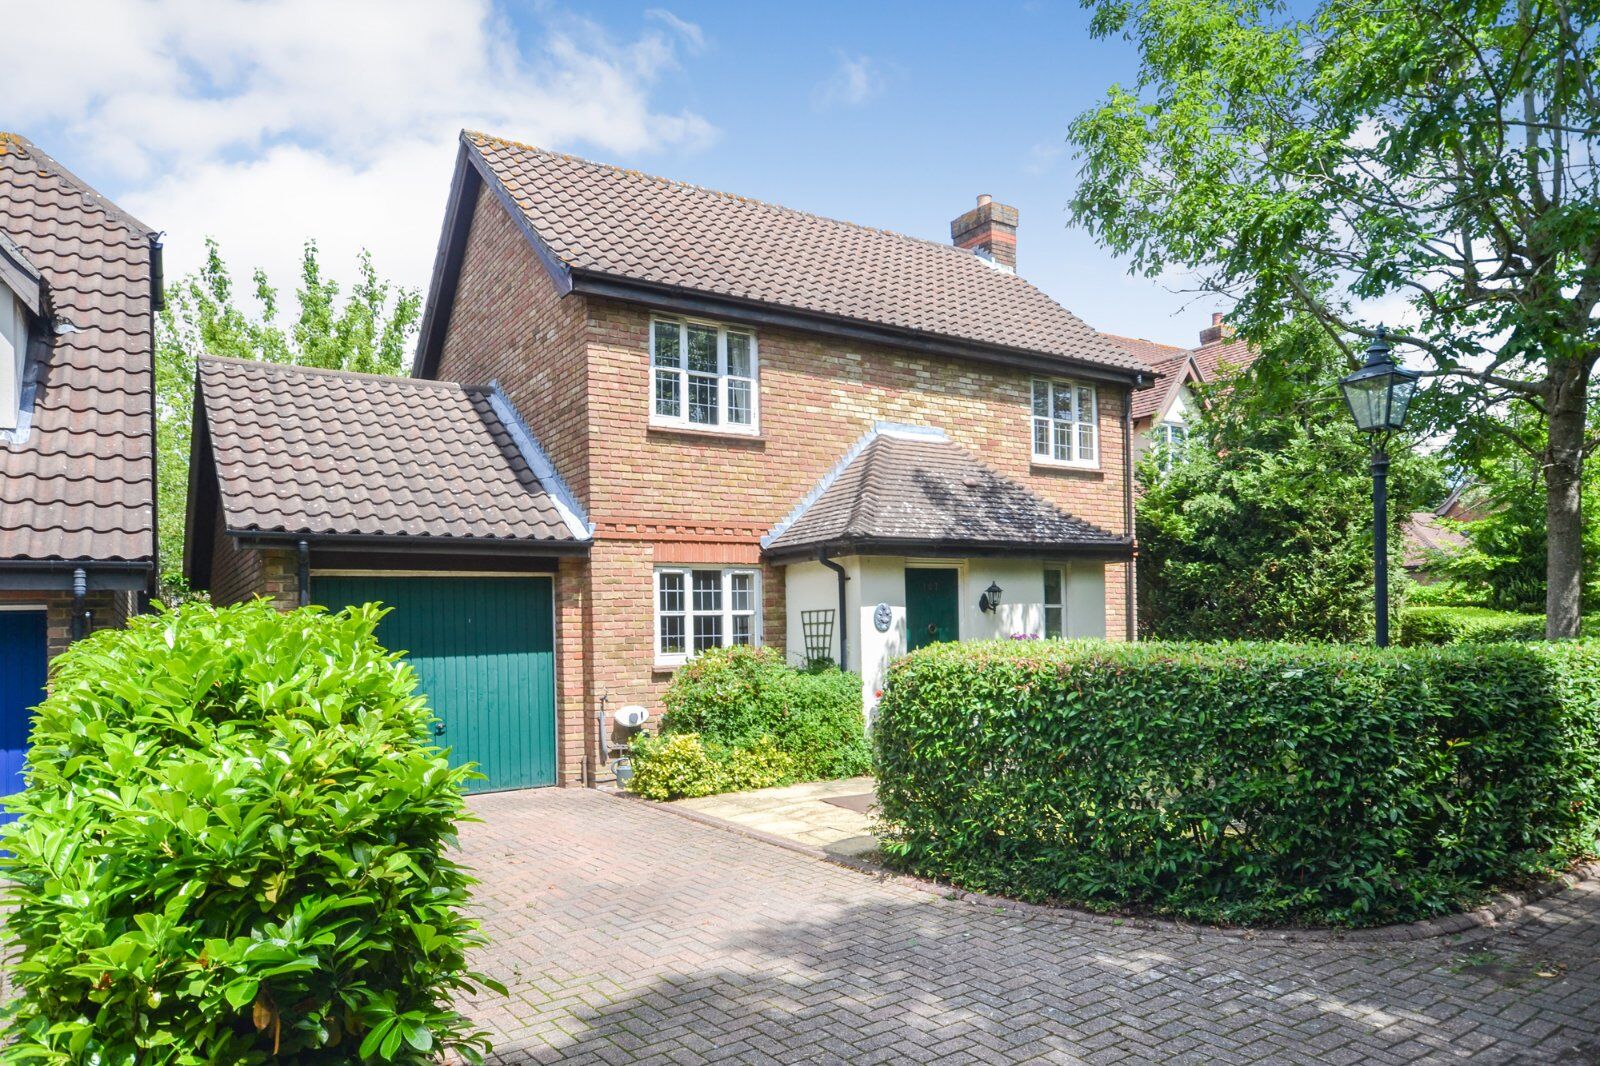 3 bedroom detached house for sale Mallards Rise, Harlow, CM17, main image